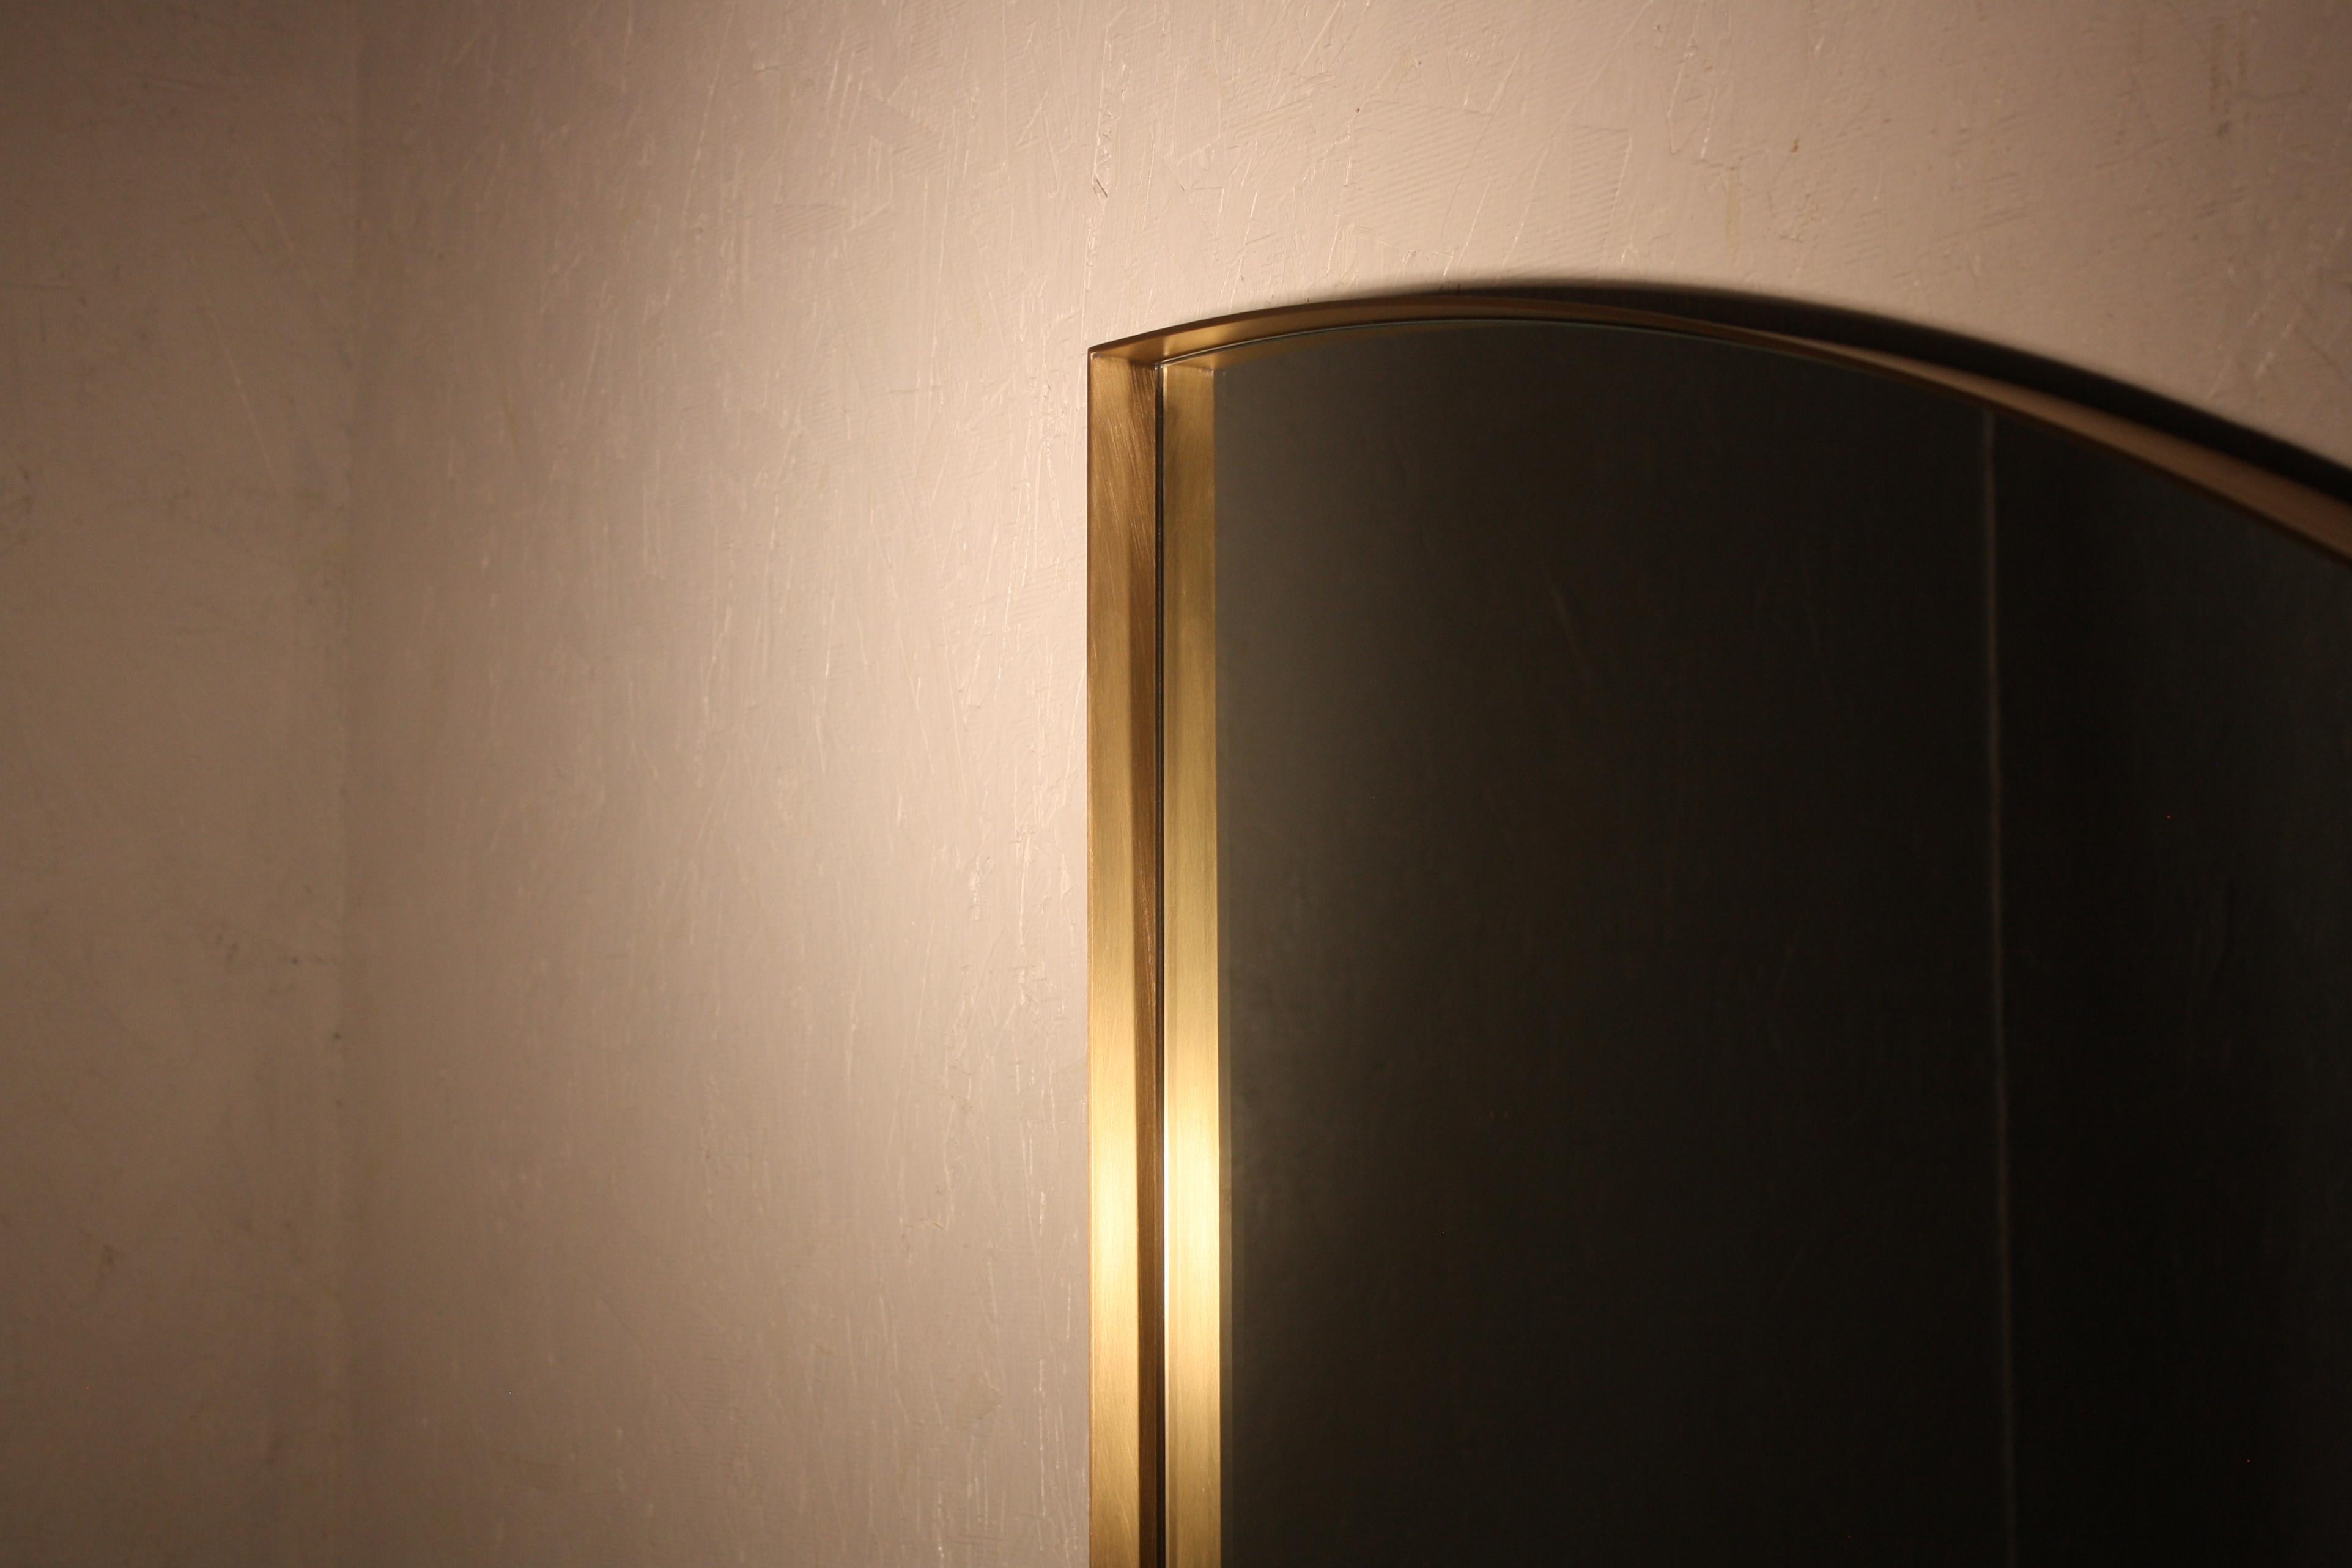 American Quarter Handmade Satin Brass and Glass Mirror by Laylo Studio For Sale